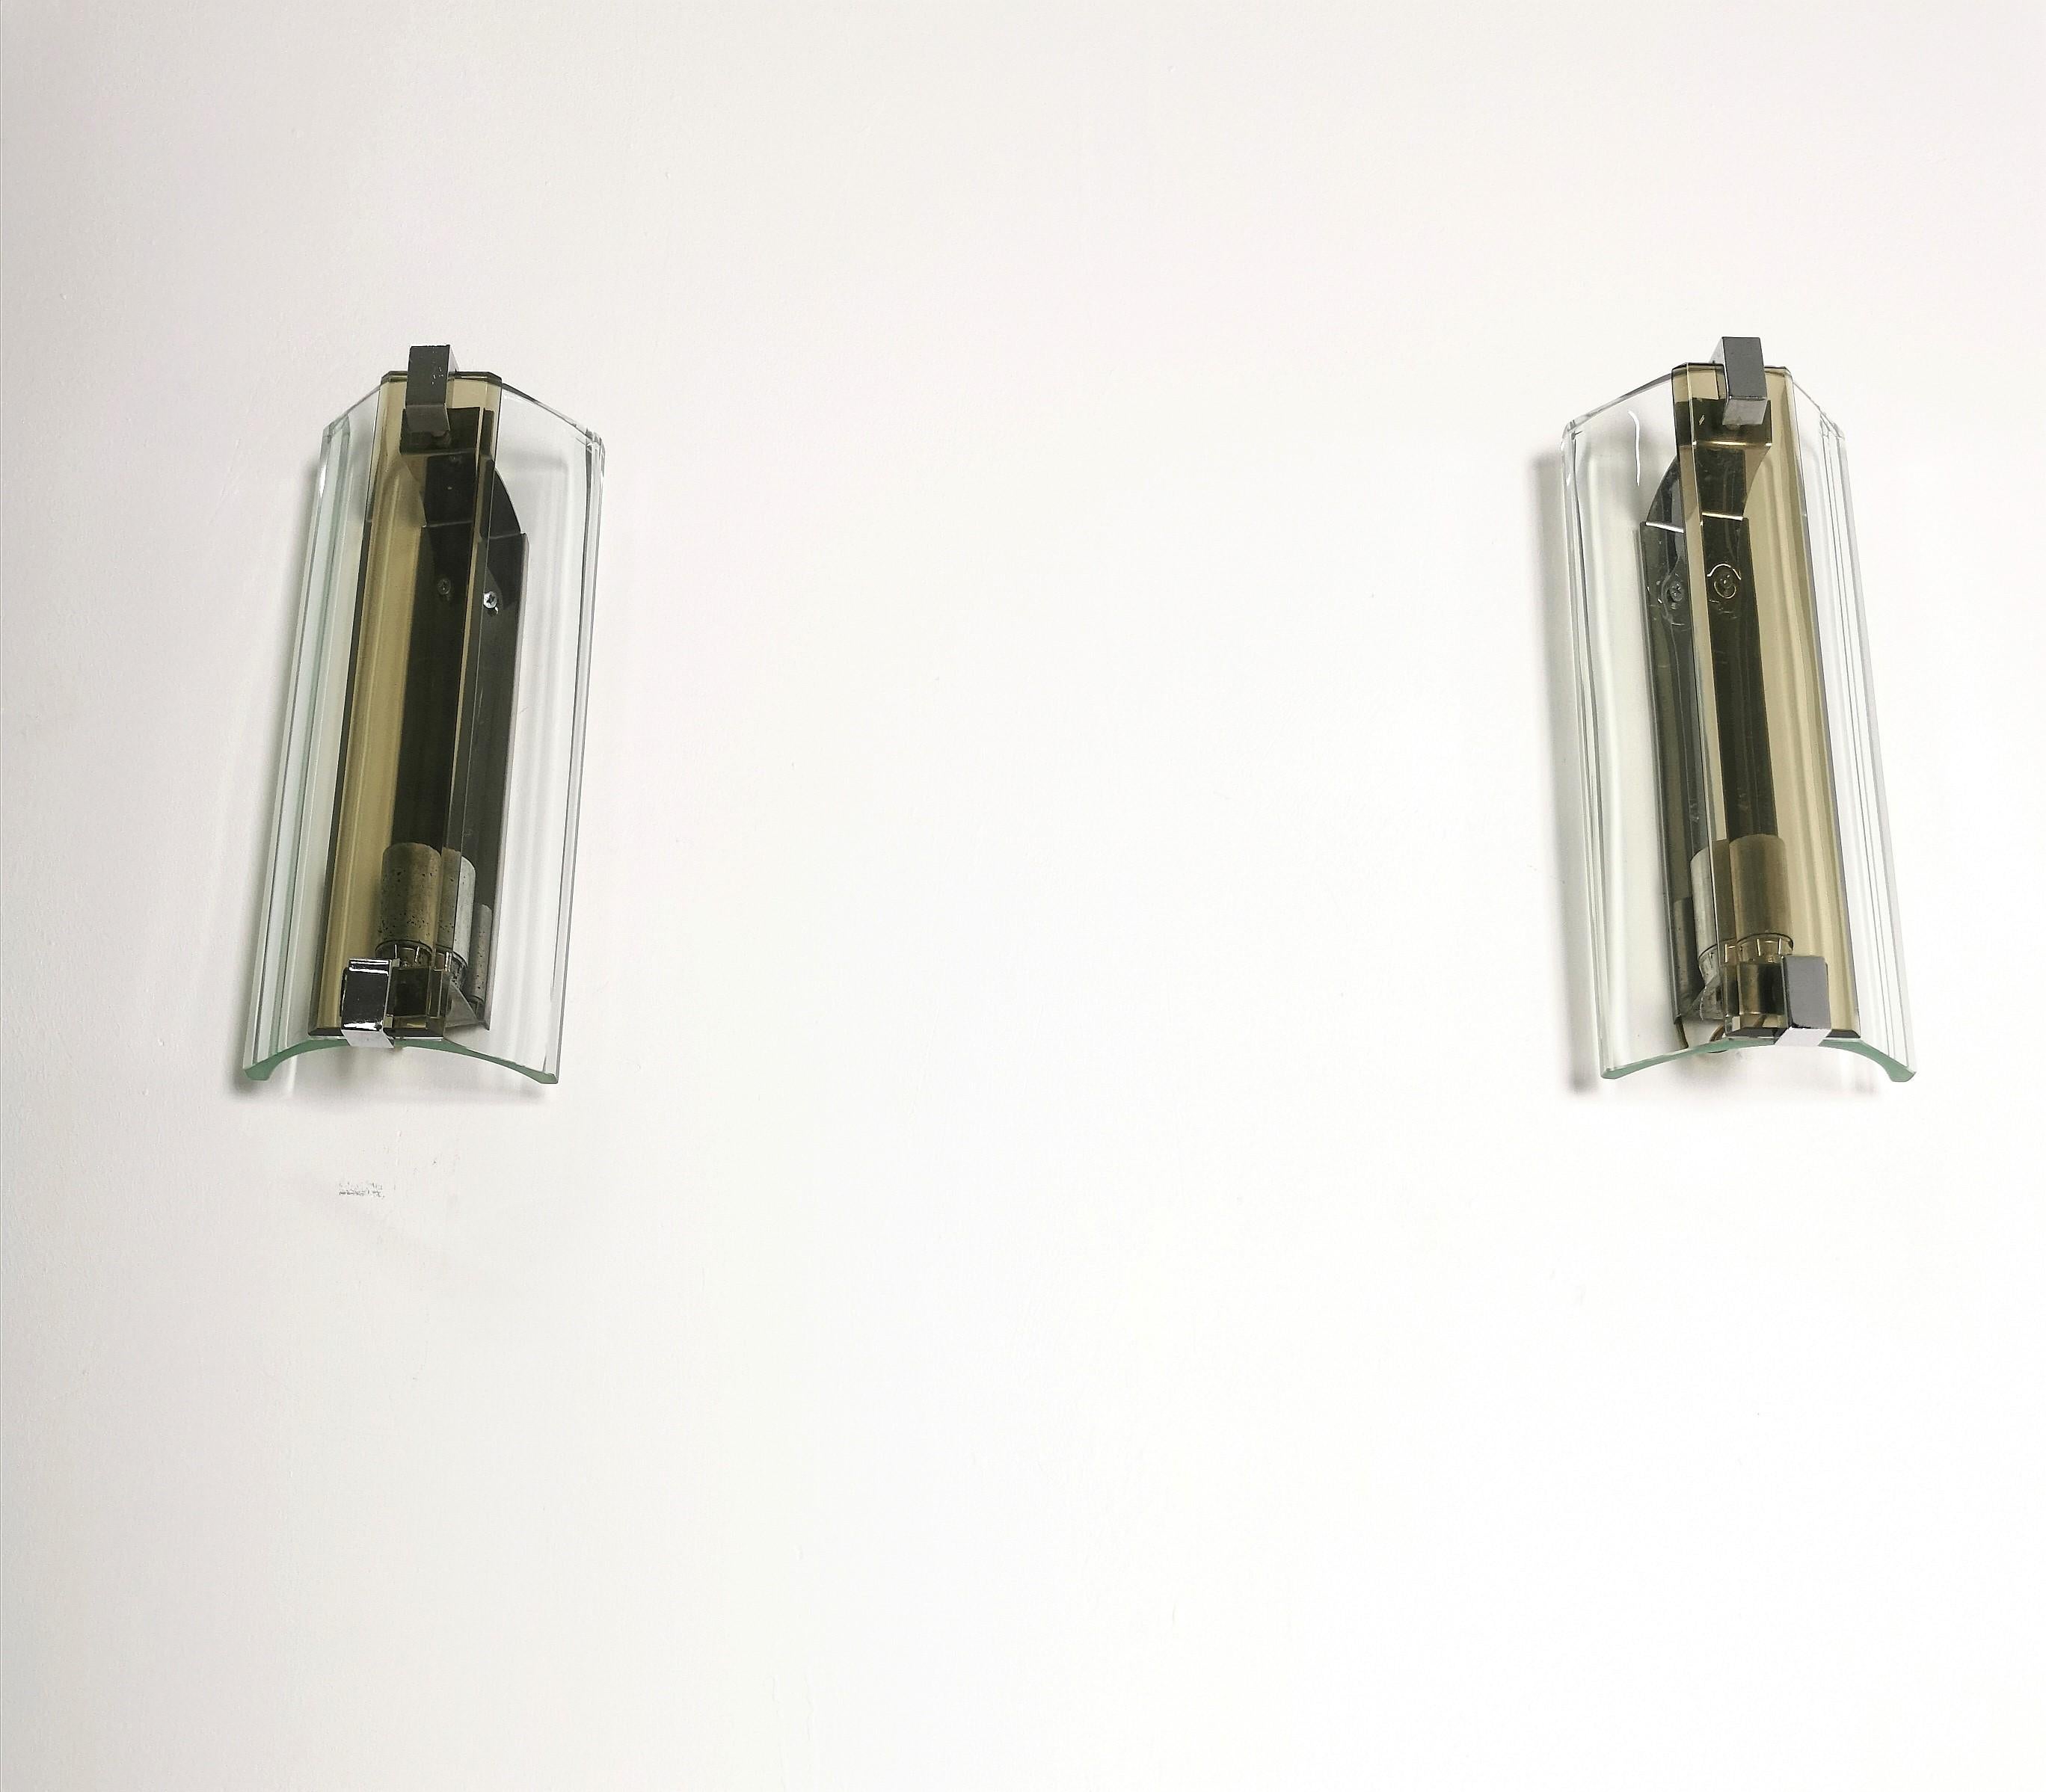 Mid-Century Modern Midcentury Wall Lights Sconces Glass Metal Aluminum Veca Italy 1970s Set of 2 For Sale